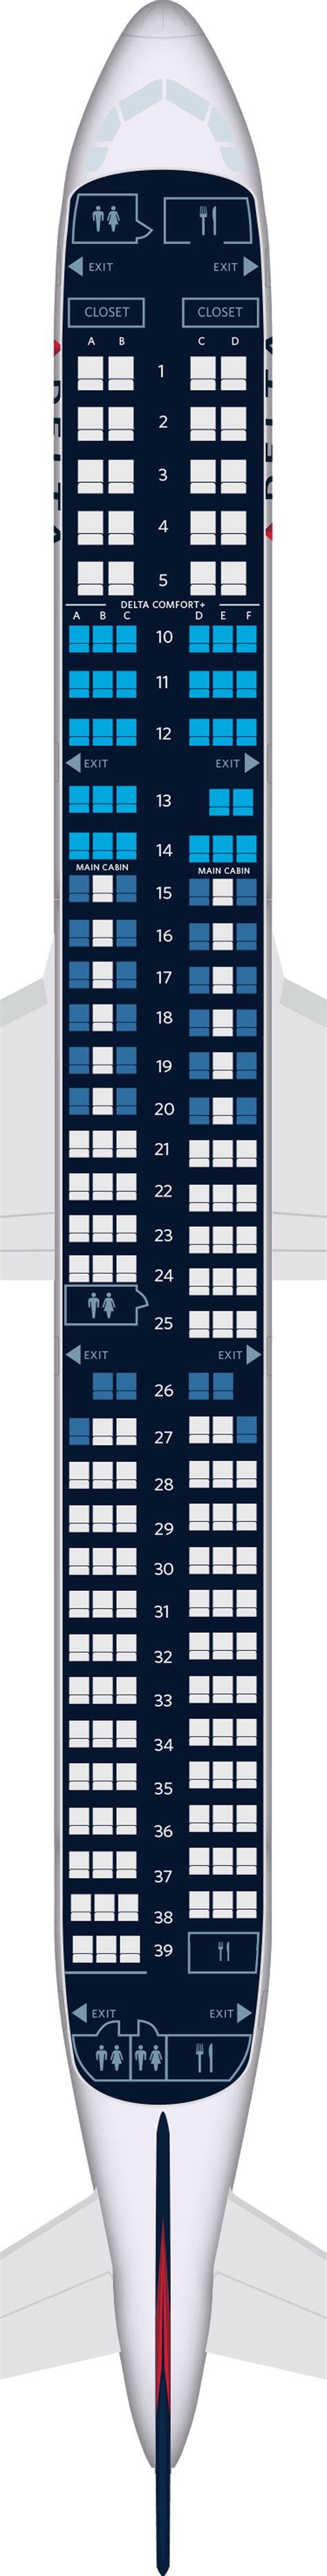 Airbus Industrie A321 Sharklets American Airlines Seating Chart Bios Pics